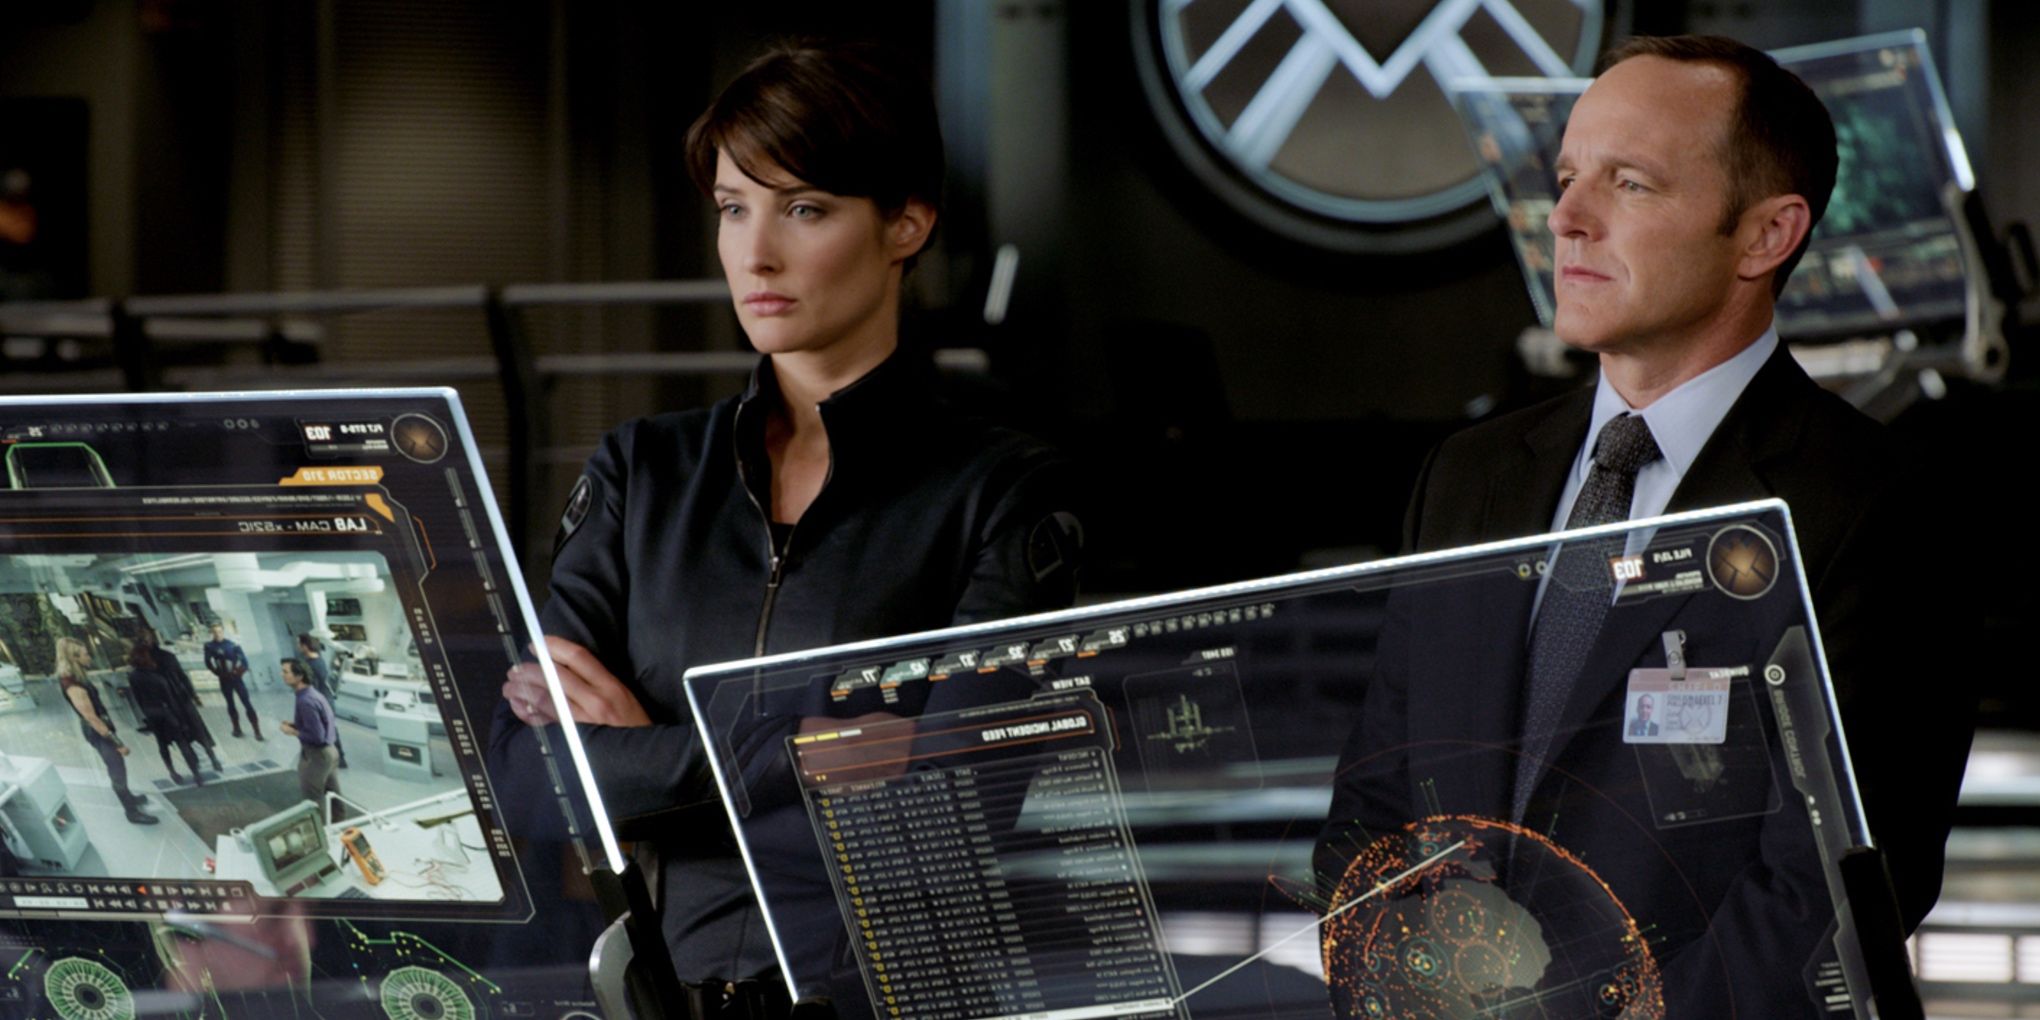 Maria Hill and Phil Coulson on the Helicarrier in The Avengers